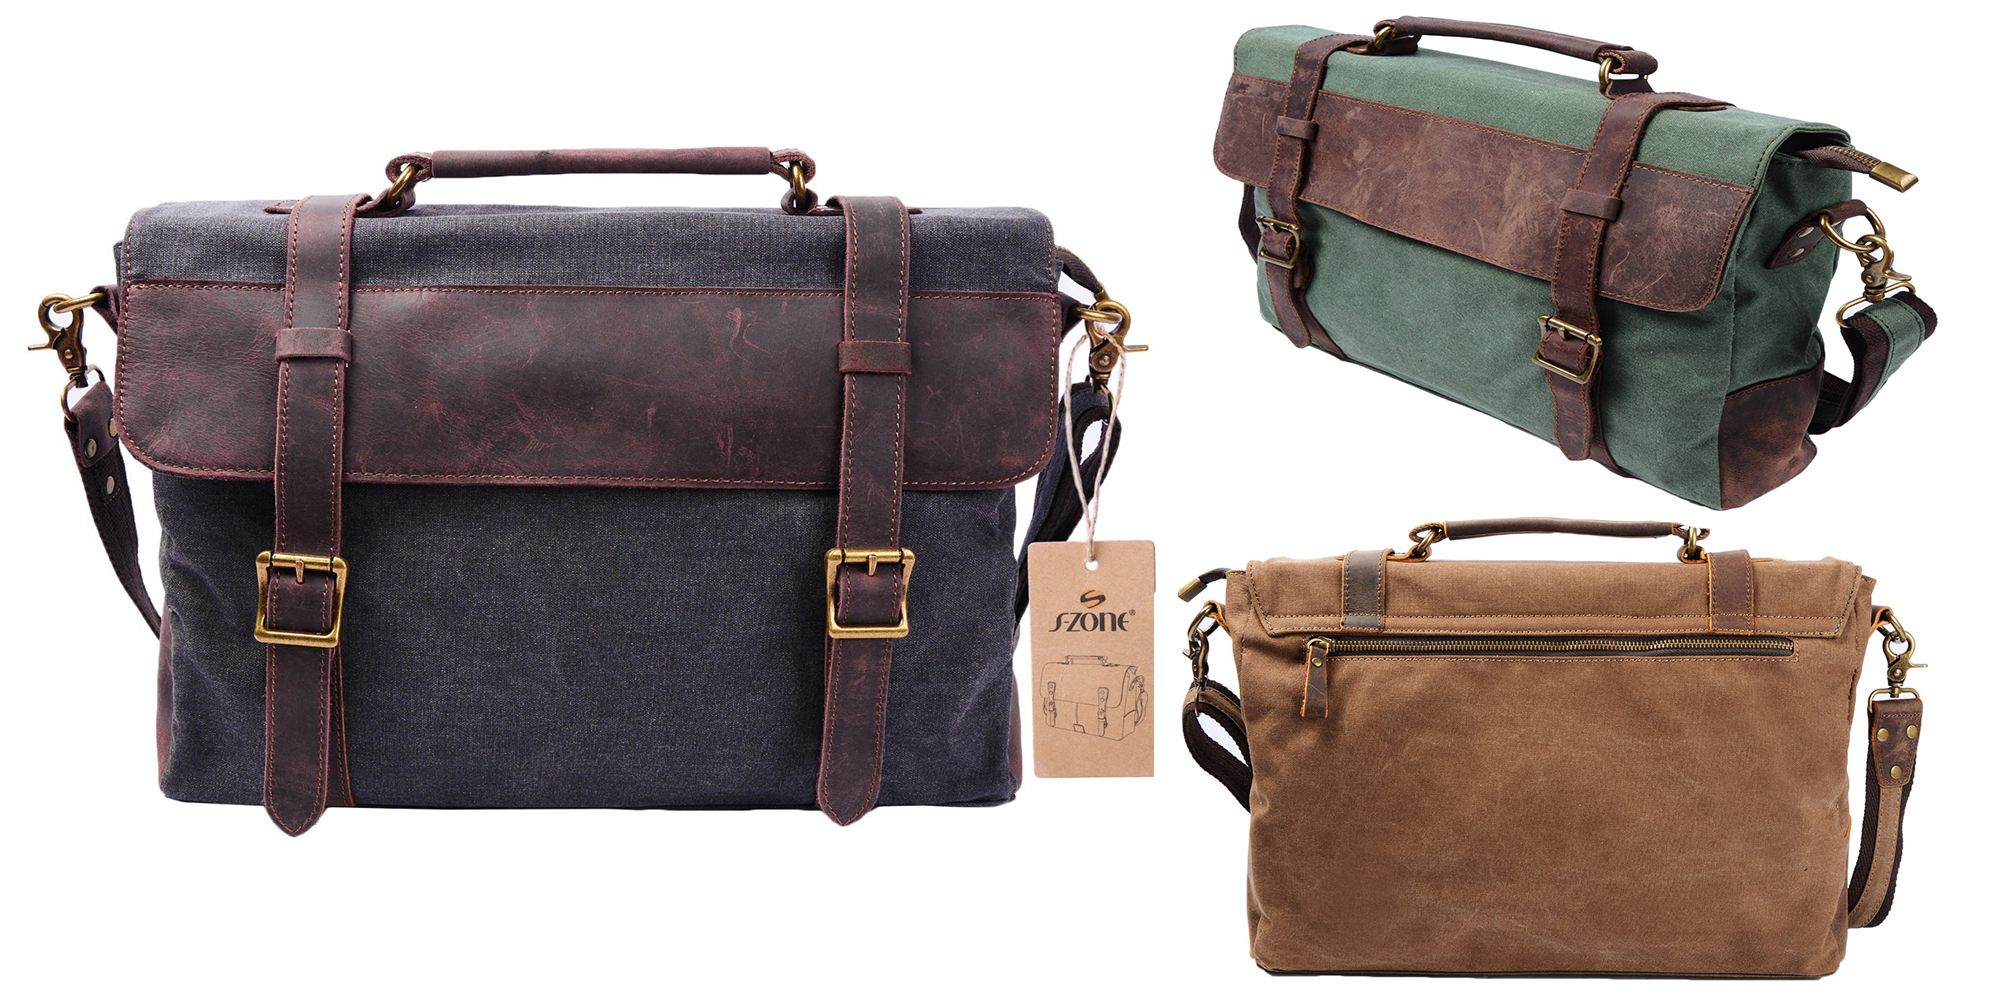 Vintage-style canvas and leather MacBook messenger bags are perfect for ...